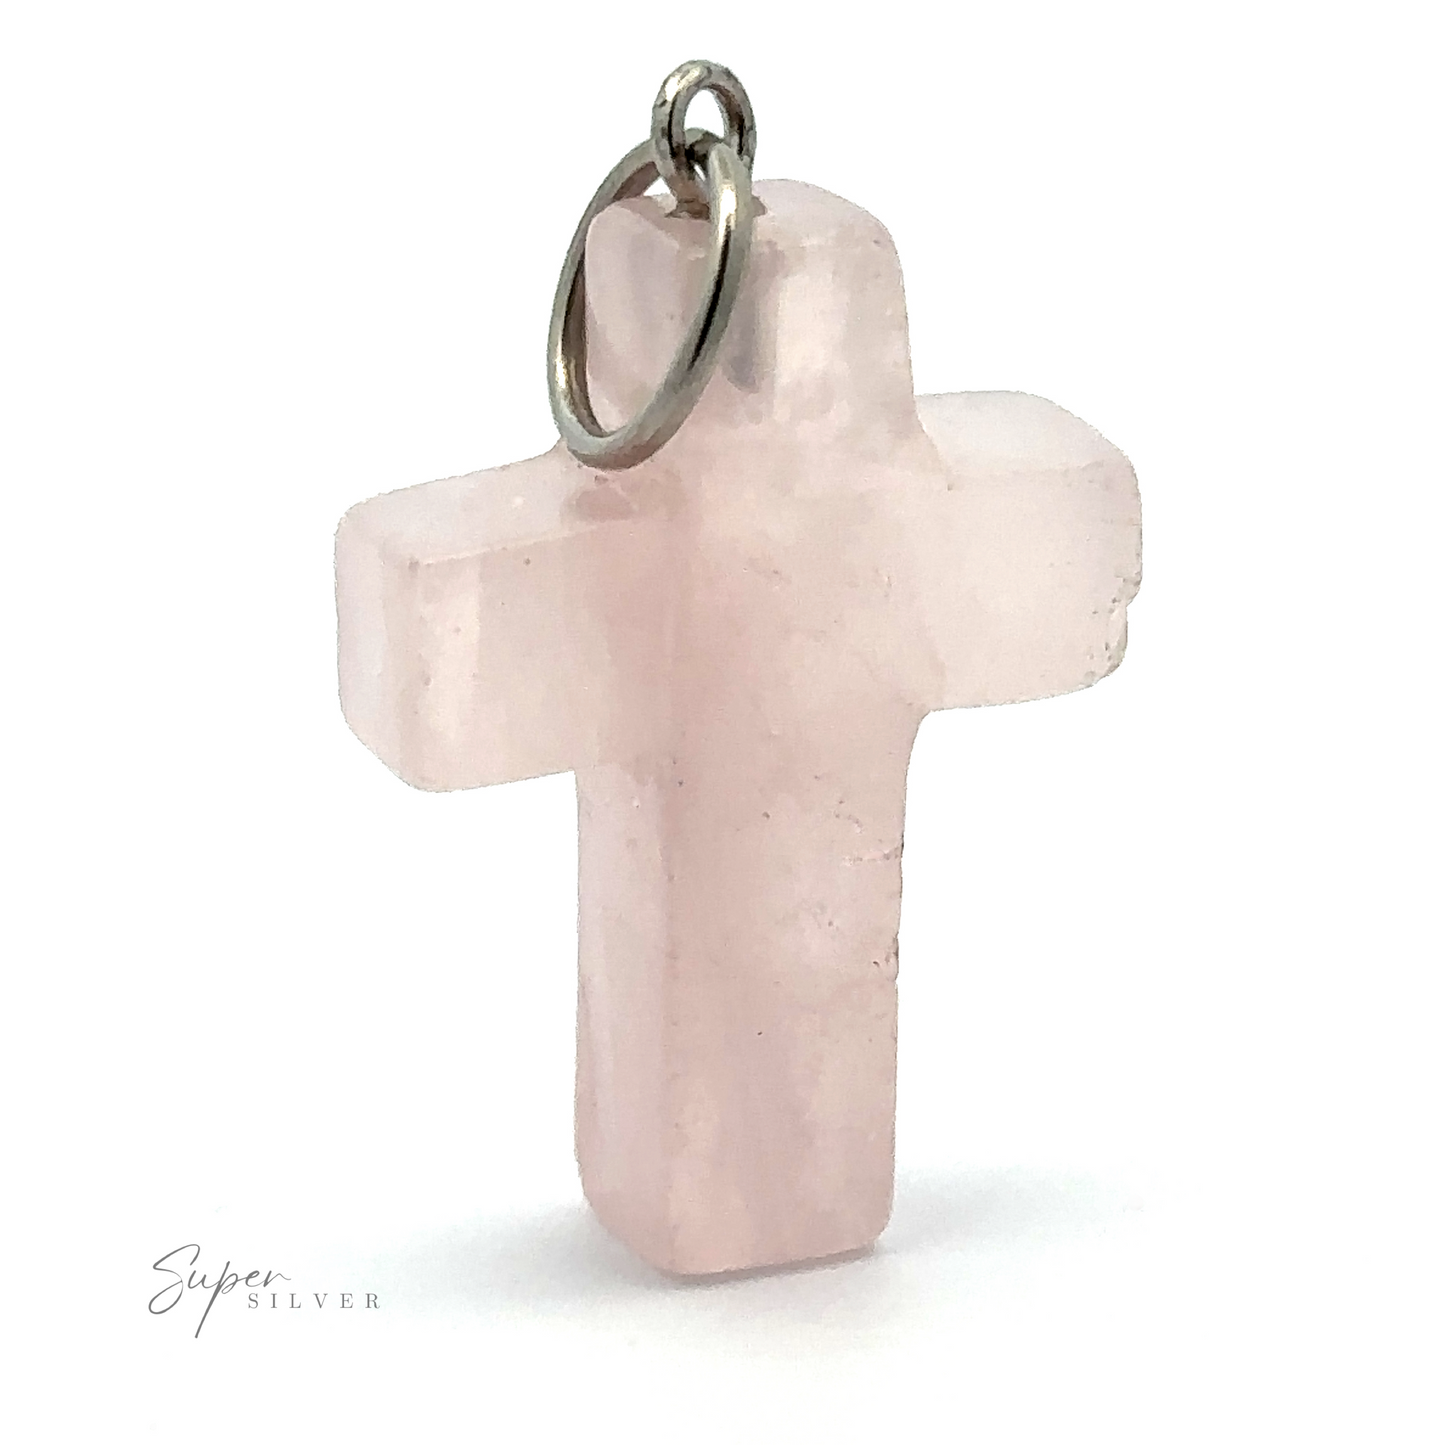 A small, pink Stone Cross Pendant made of rose quartz with a metal loop at the top for attaching to a necklace. The words "Super Silver" are visible on the bottom left corner.